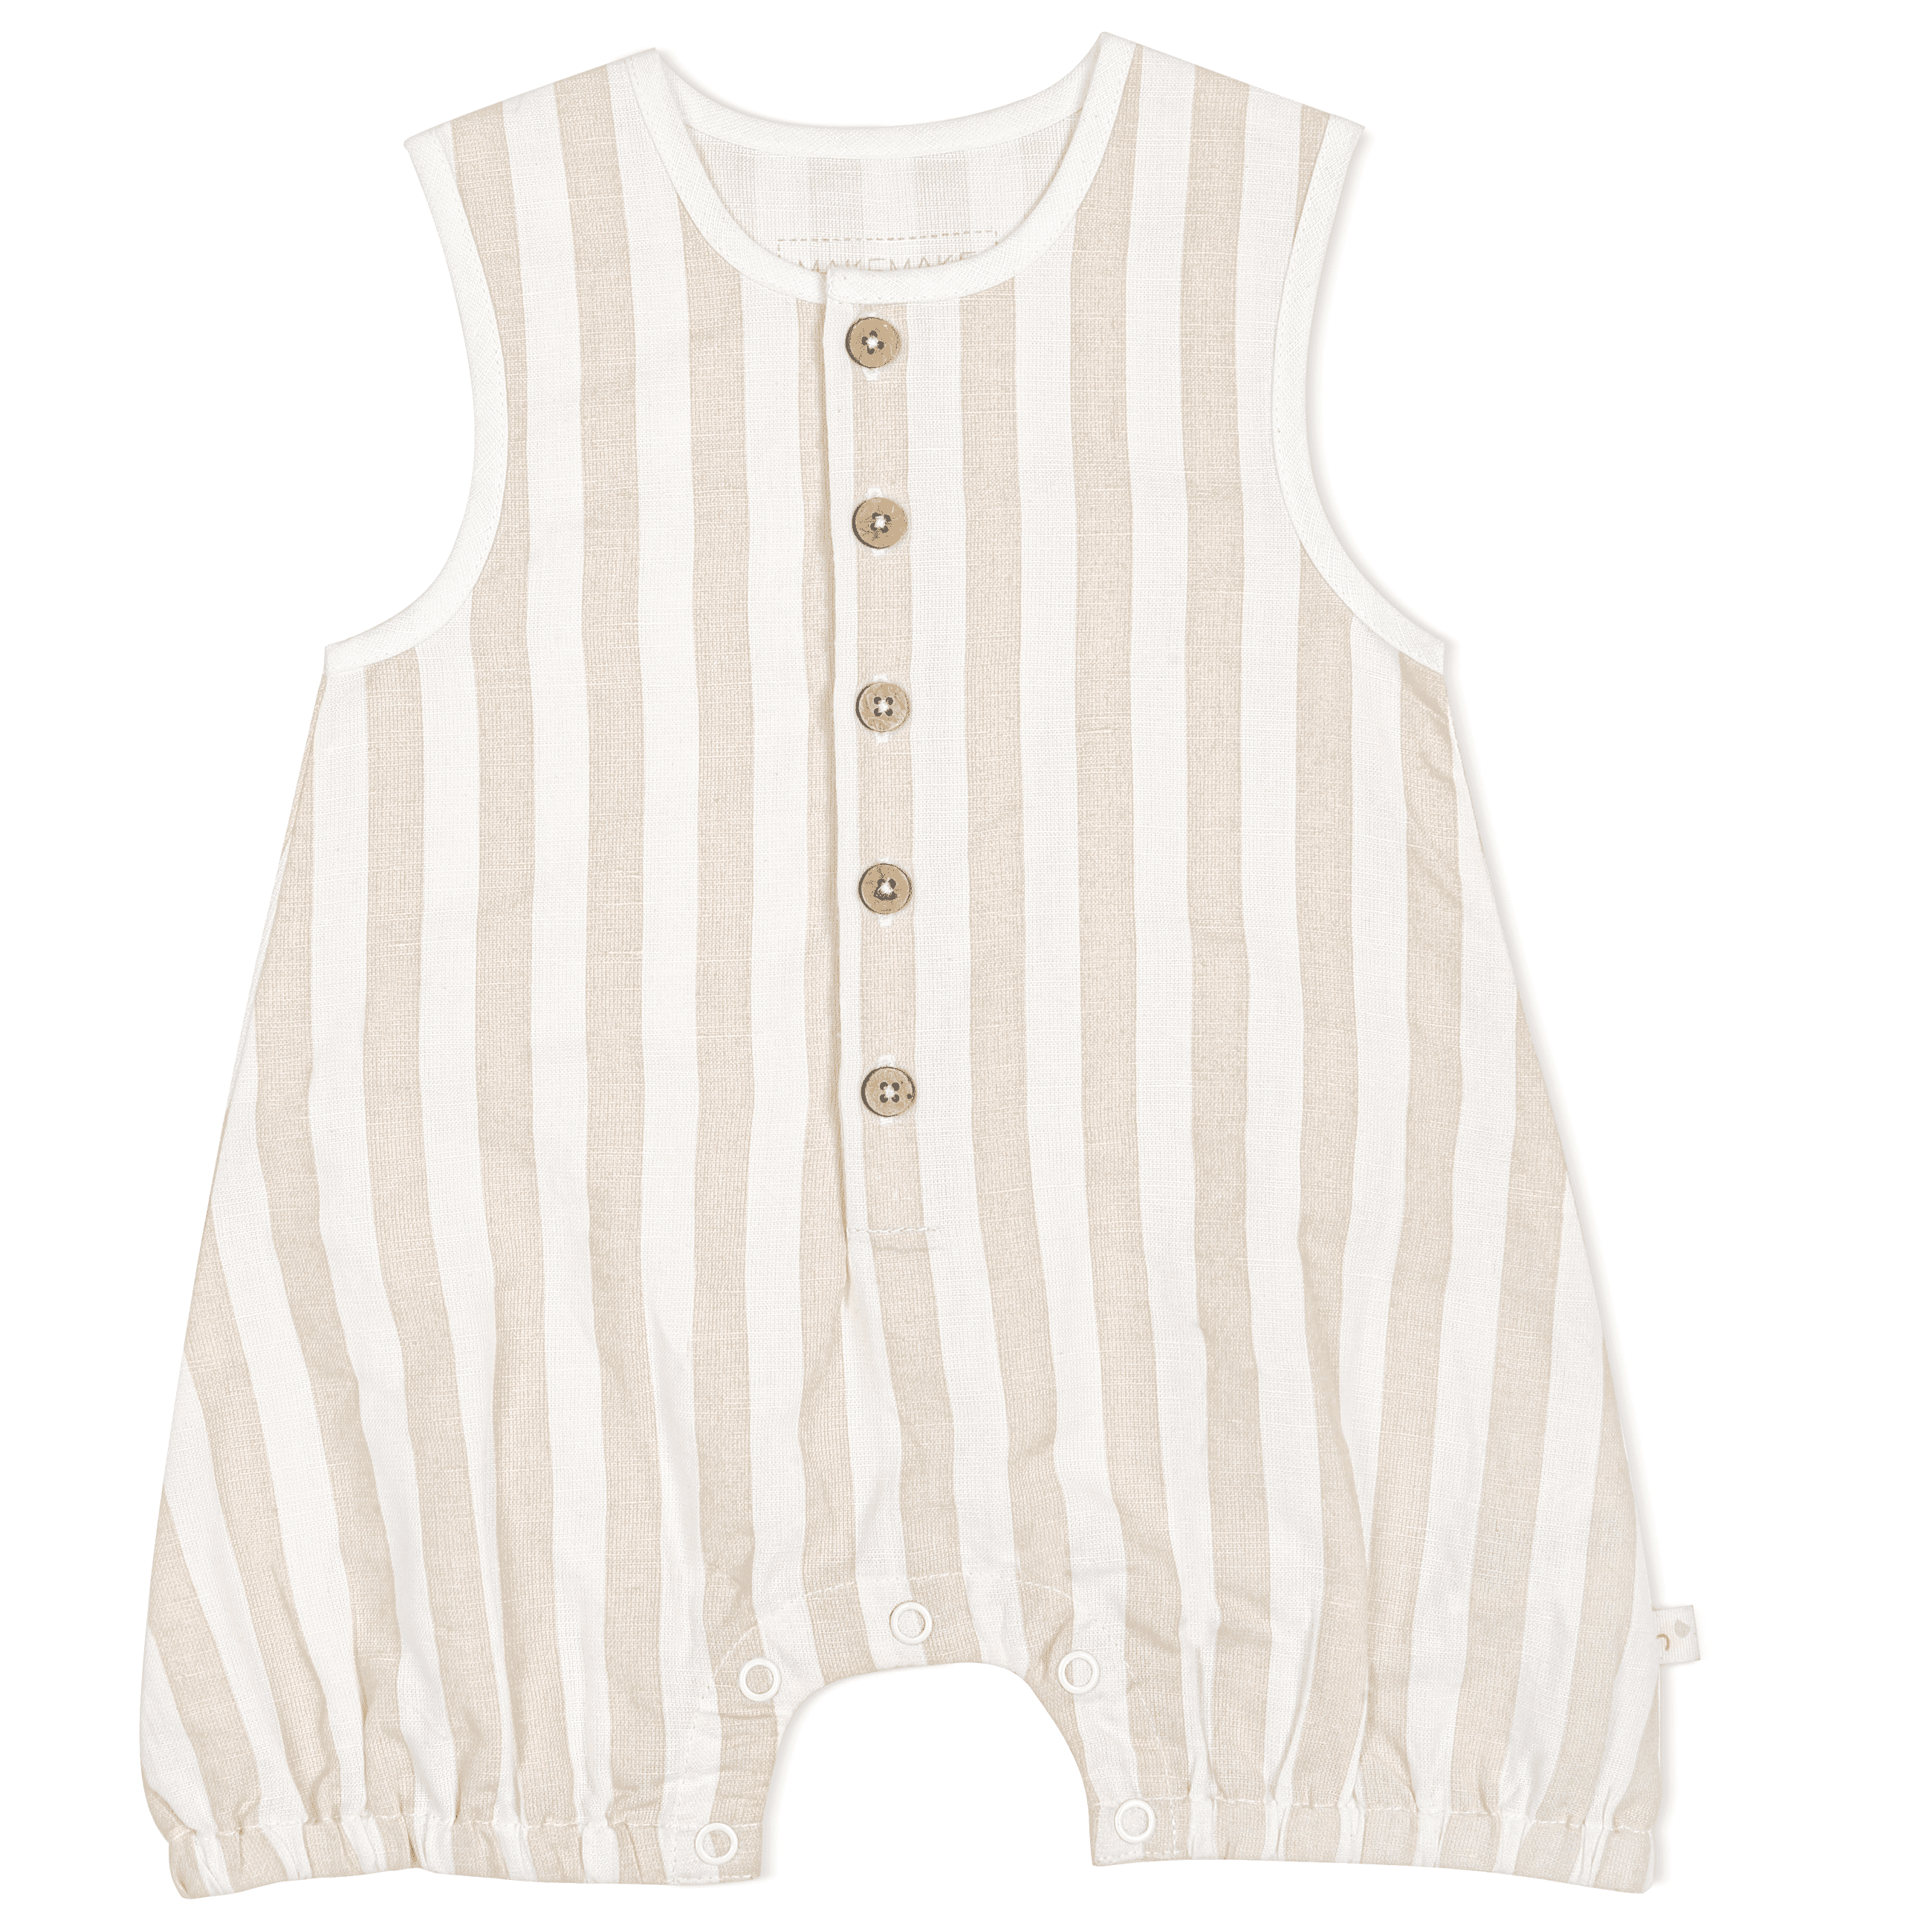 A Makemake Organics Organic Sleeveless Bubble Romper in Beige Stripes featuring vertical beige and white stripes, with wooden buttons down the center front and snap fasteners along the legs, perfect for a baby girl.